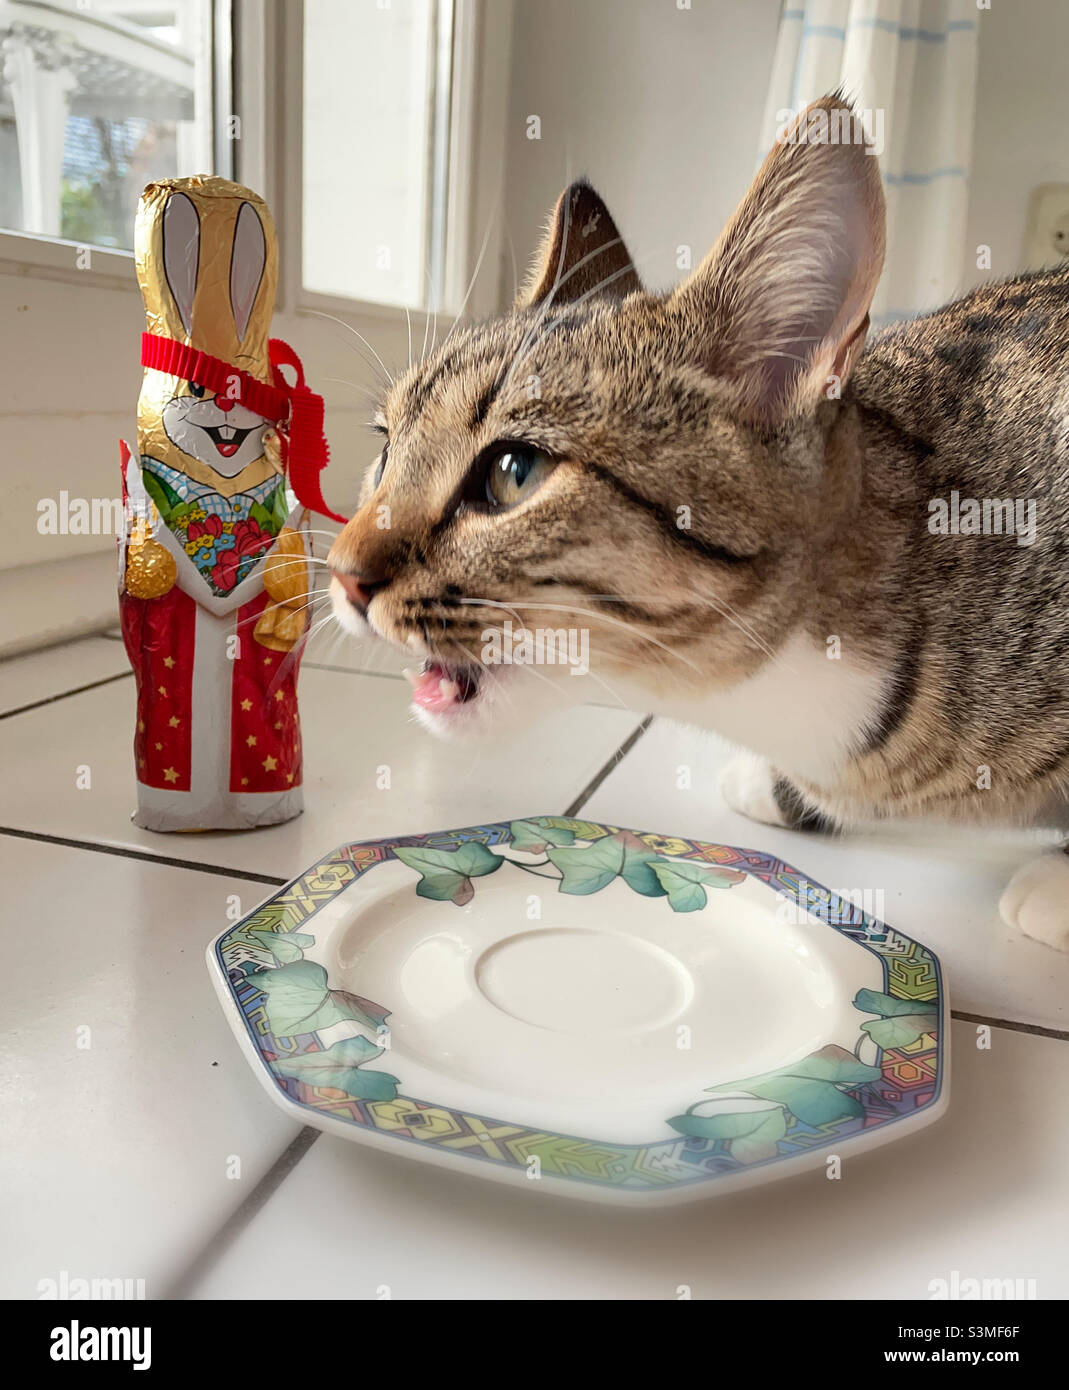 The Cat likes it all. Stock Photo